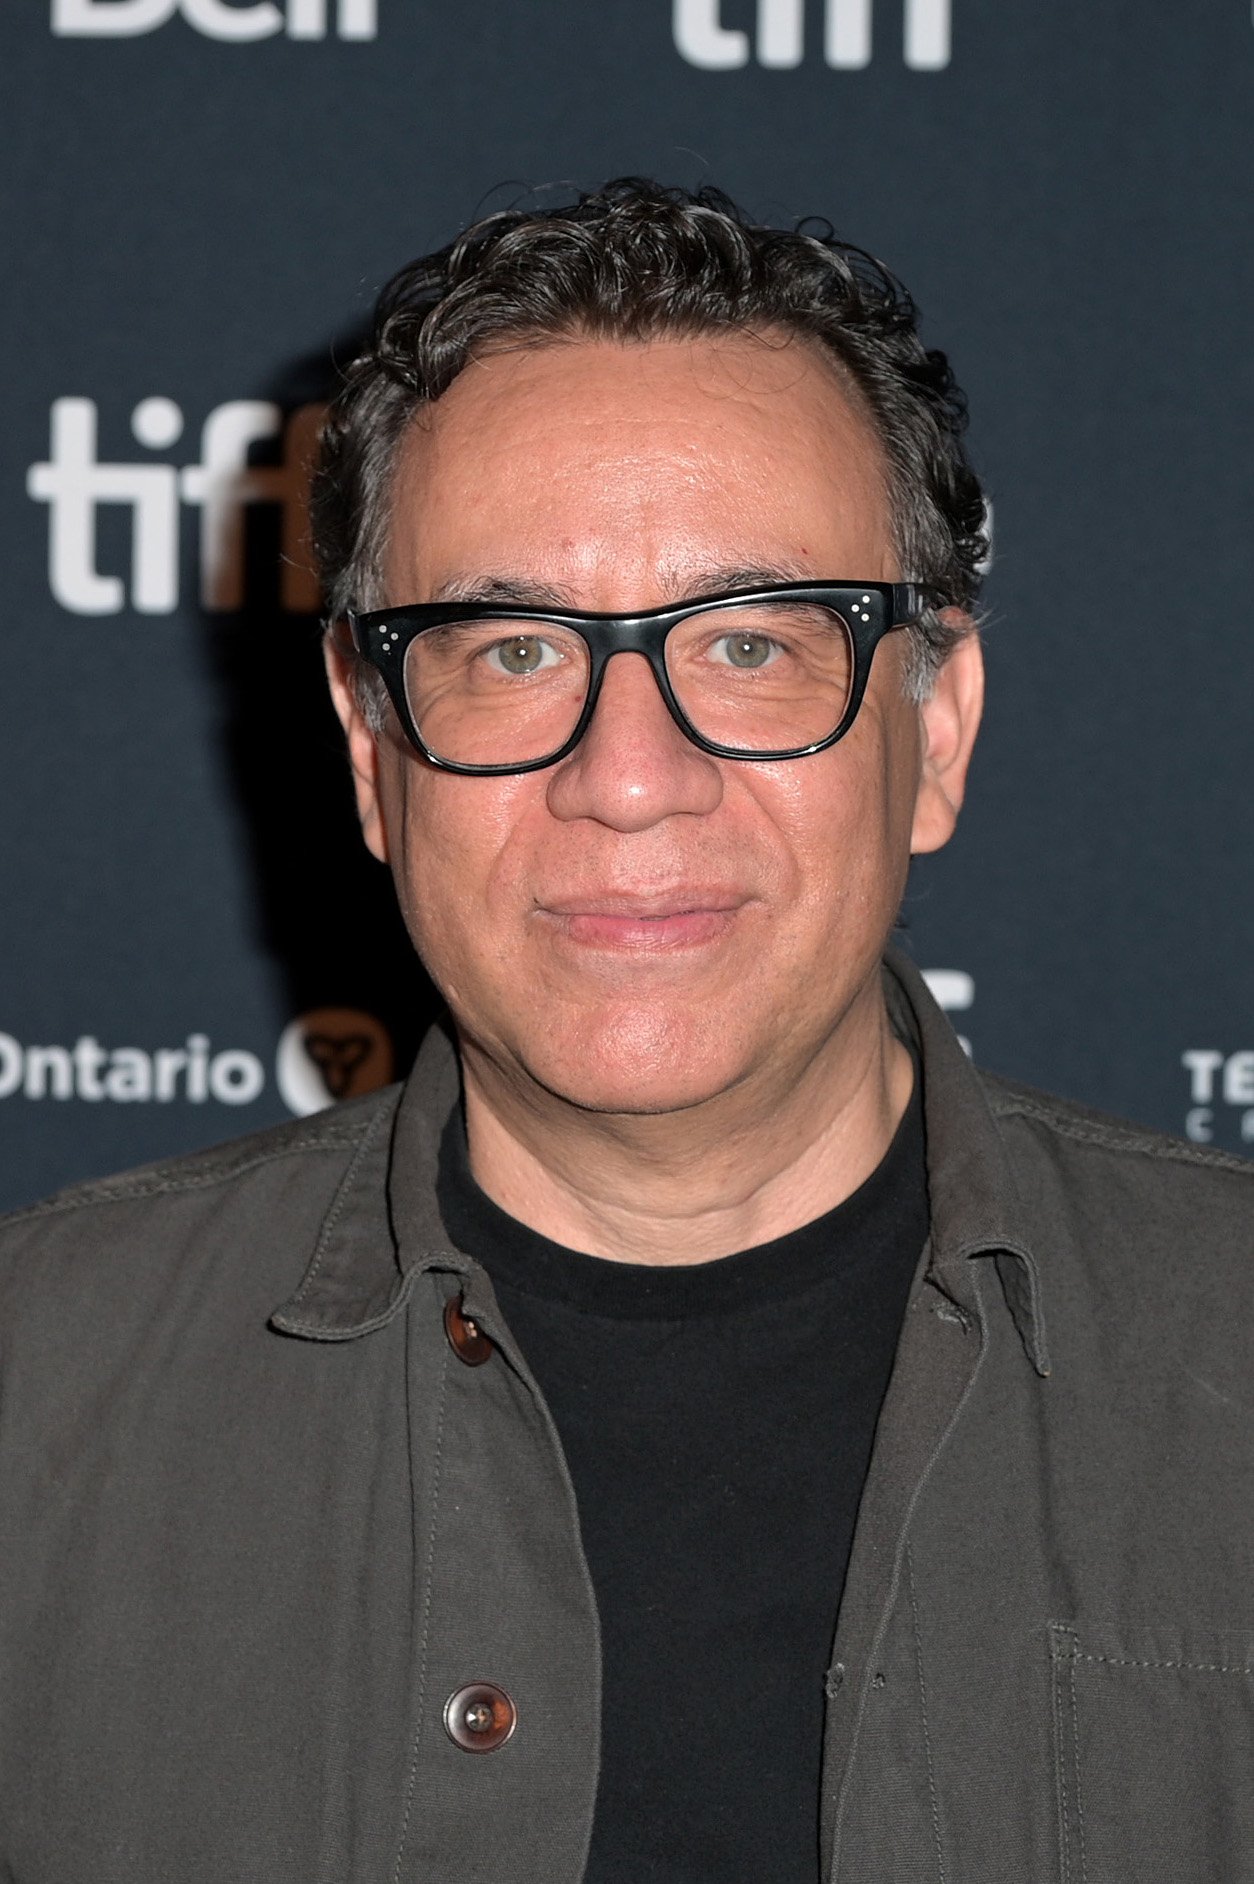 Fred Armisenat Scotiabank Theatre on September 10, 2022, in Toronto, Ontario. | Source: Getty Images